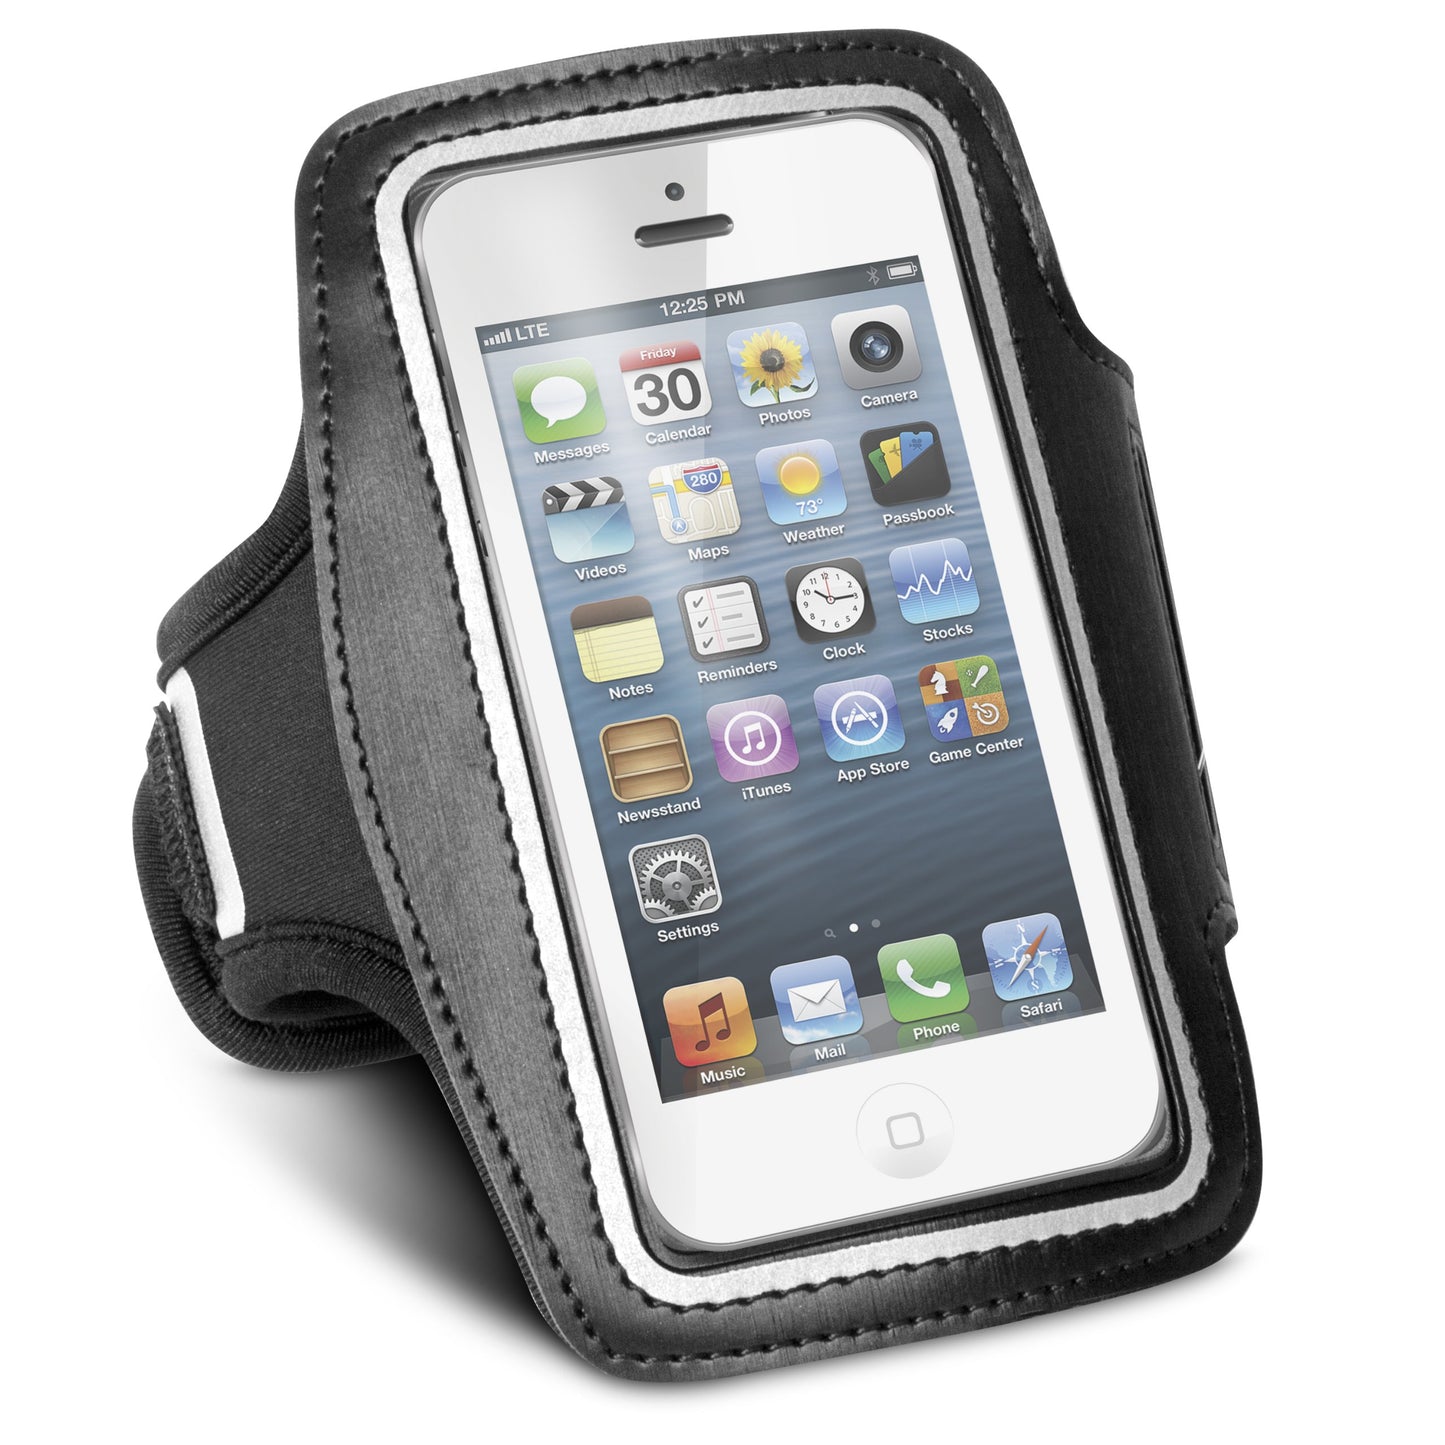 iSound Front Runner Exercise Armband for iPhone an iPod touch (Black)